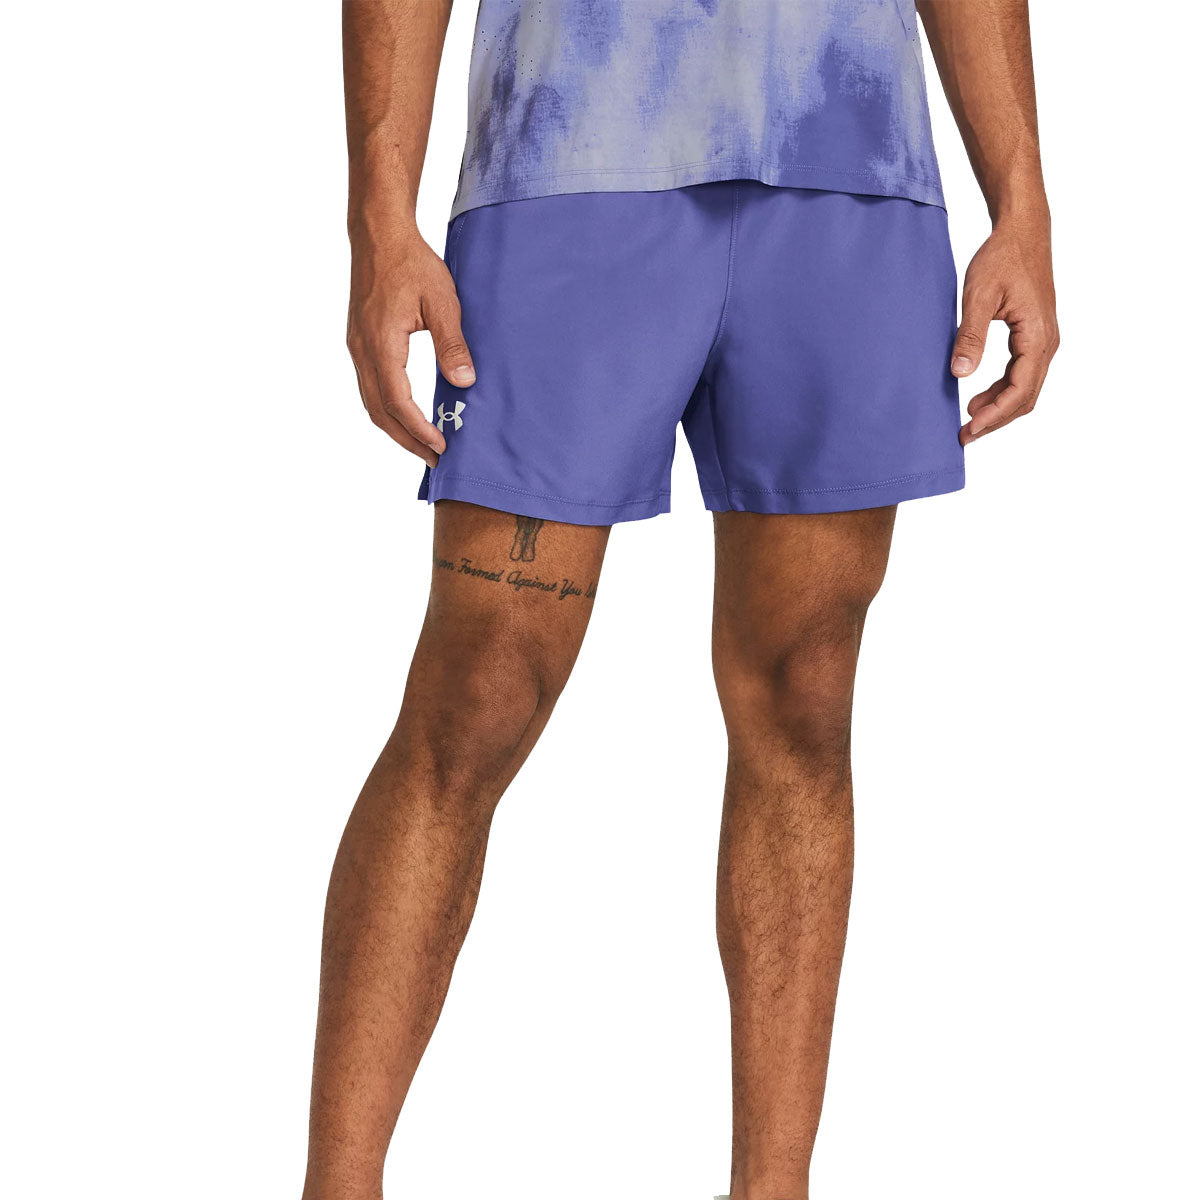 Under Armour Launch 5 inch Running Shorts - Mens - Starlight/Reflective